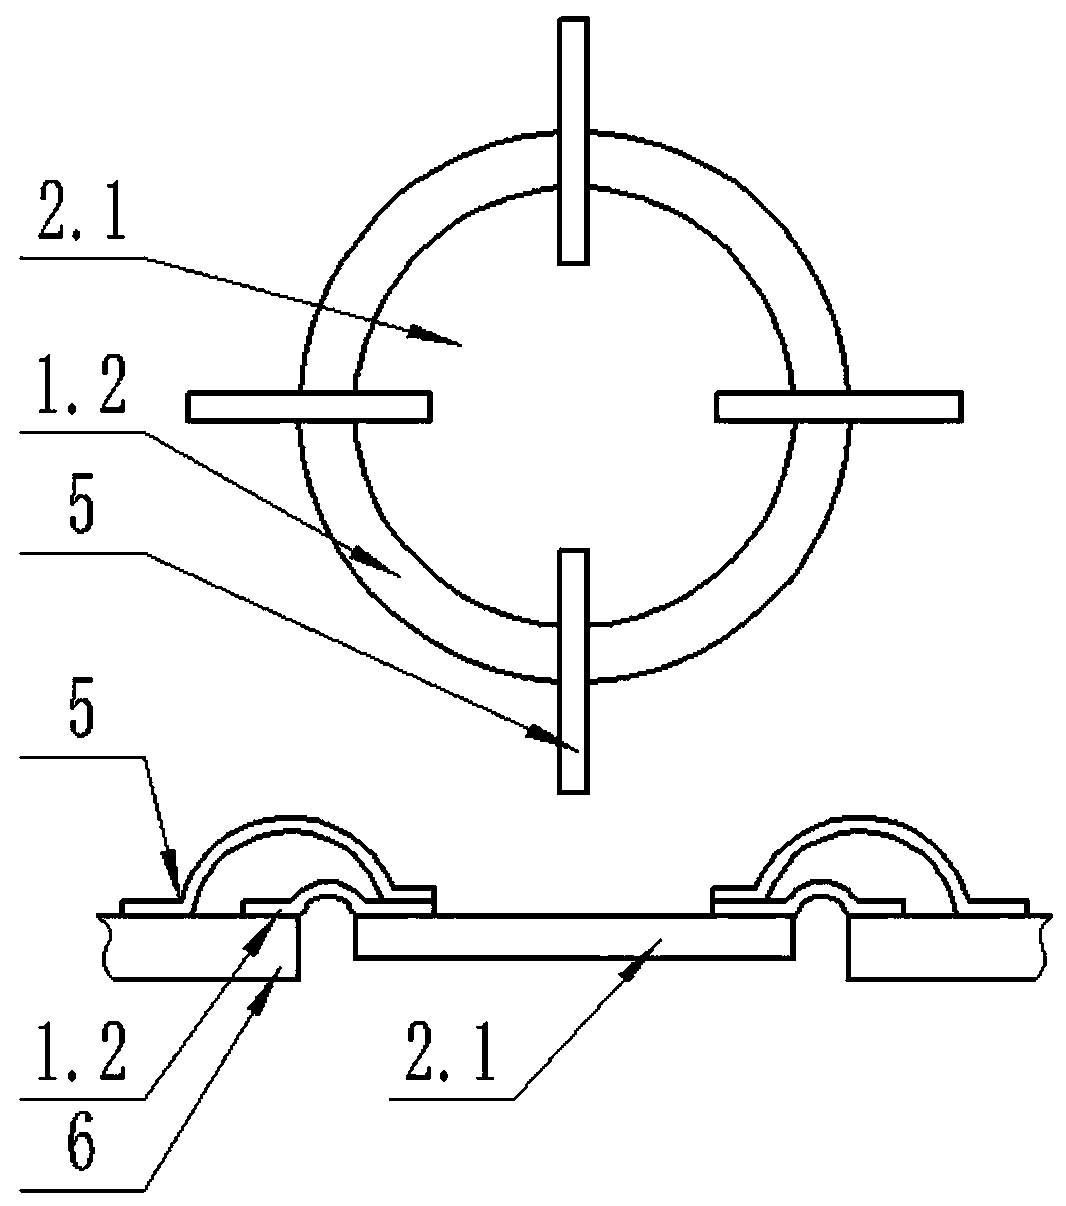 Application of speakers with airtight rings in hifi speakers and methods of strengthening damping